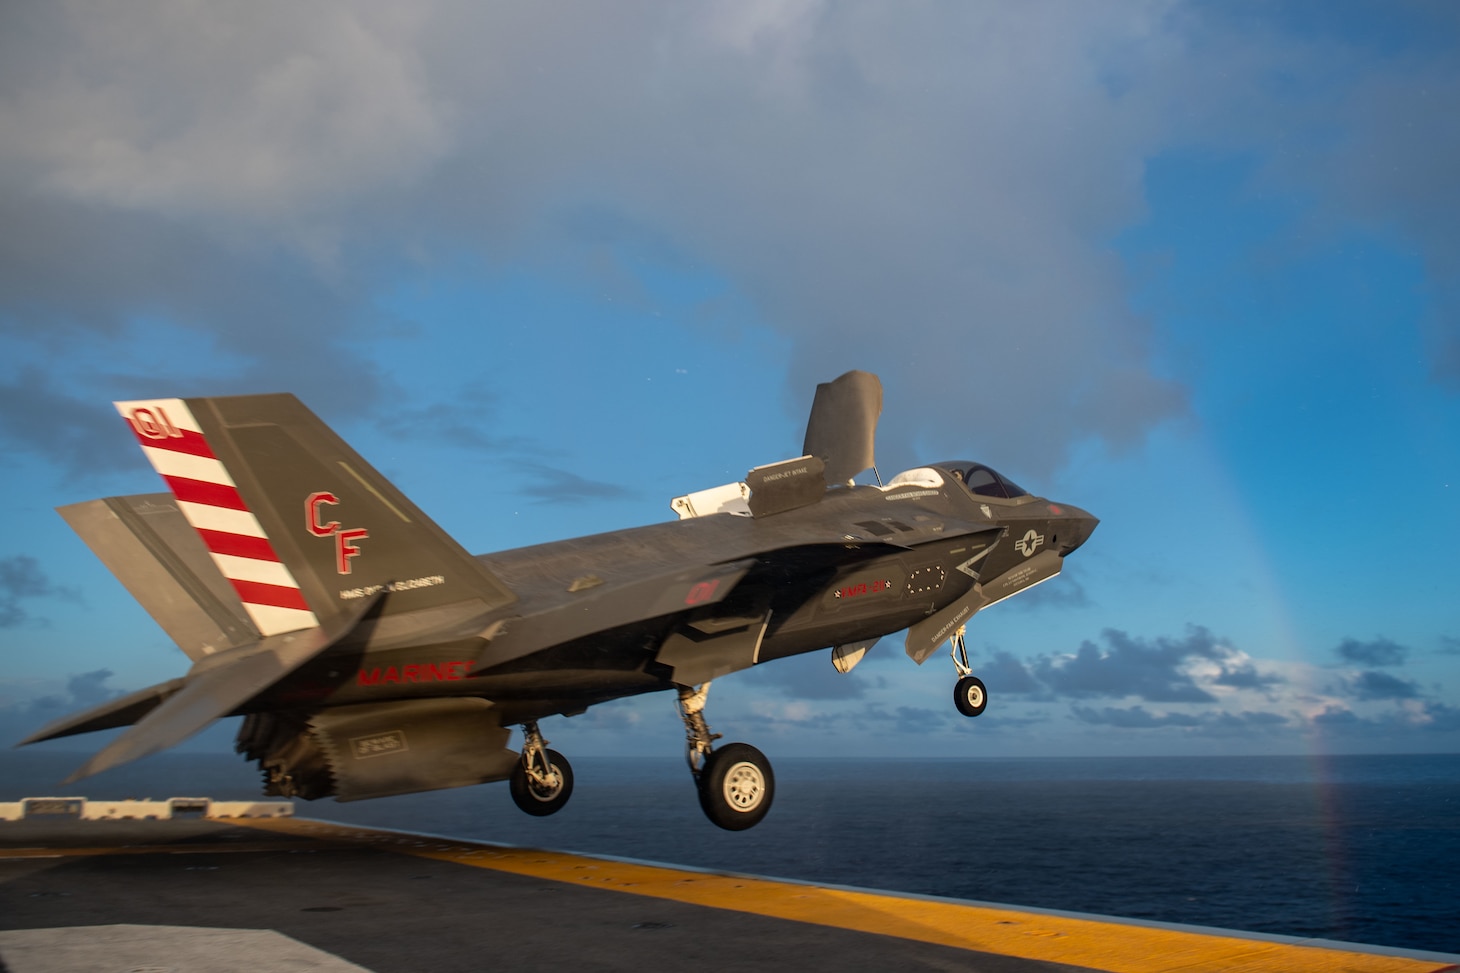 PHILIPPINE SEA (Aug. 20, 2021) An F-35B Lightning II fighter aircraft from Marine Fighter Attack Squadron (VMFA) 211, embarked on the Royal Navy aircraft carrier HMS Queen Elizabeth (R08), takes off from the flight deck of the forward-deployed amphibious assault ship USS America (LHA 6) during flight operations between and America and the Royal Navy. America, flagship of the America Expeditionary Strike Group, along with the 31st Marine Expeditionary Unit, is operating in the U.S. 7th Fleet area of responsibility to enhance interoperability with allies and partners and serve as a ready response force to defend peace and stability in the Indo-Pacific region. (U.S. Navy photo by Mass Communication Specialist 3rd Class Matthew Cavenaile)